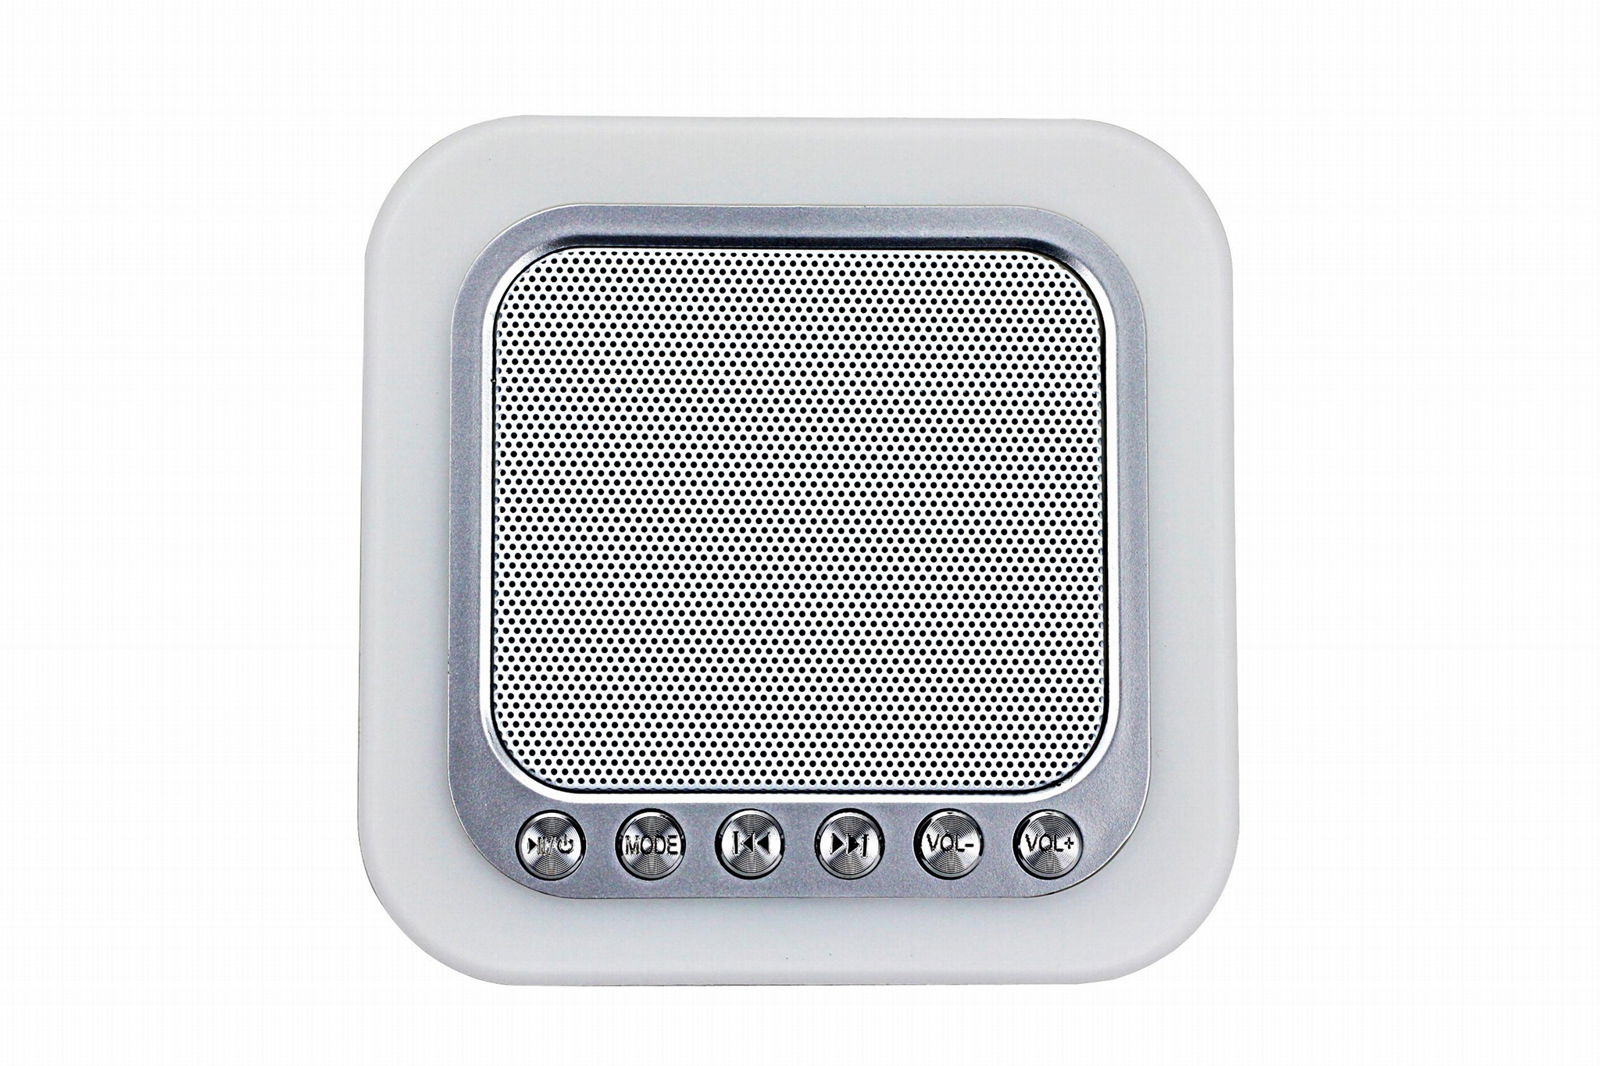 Colorful 5W led bluetooth speaker home design with alarm clock function